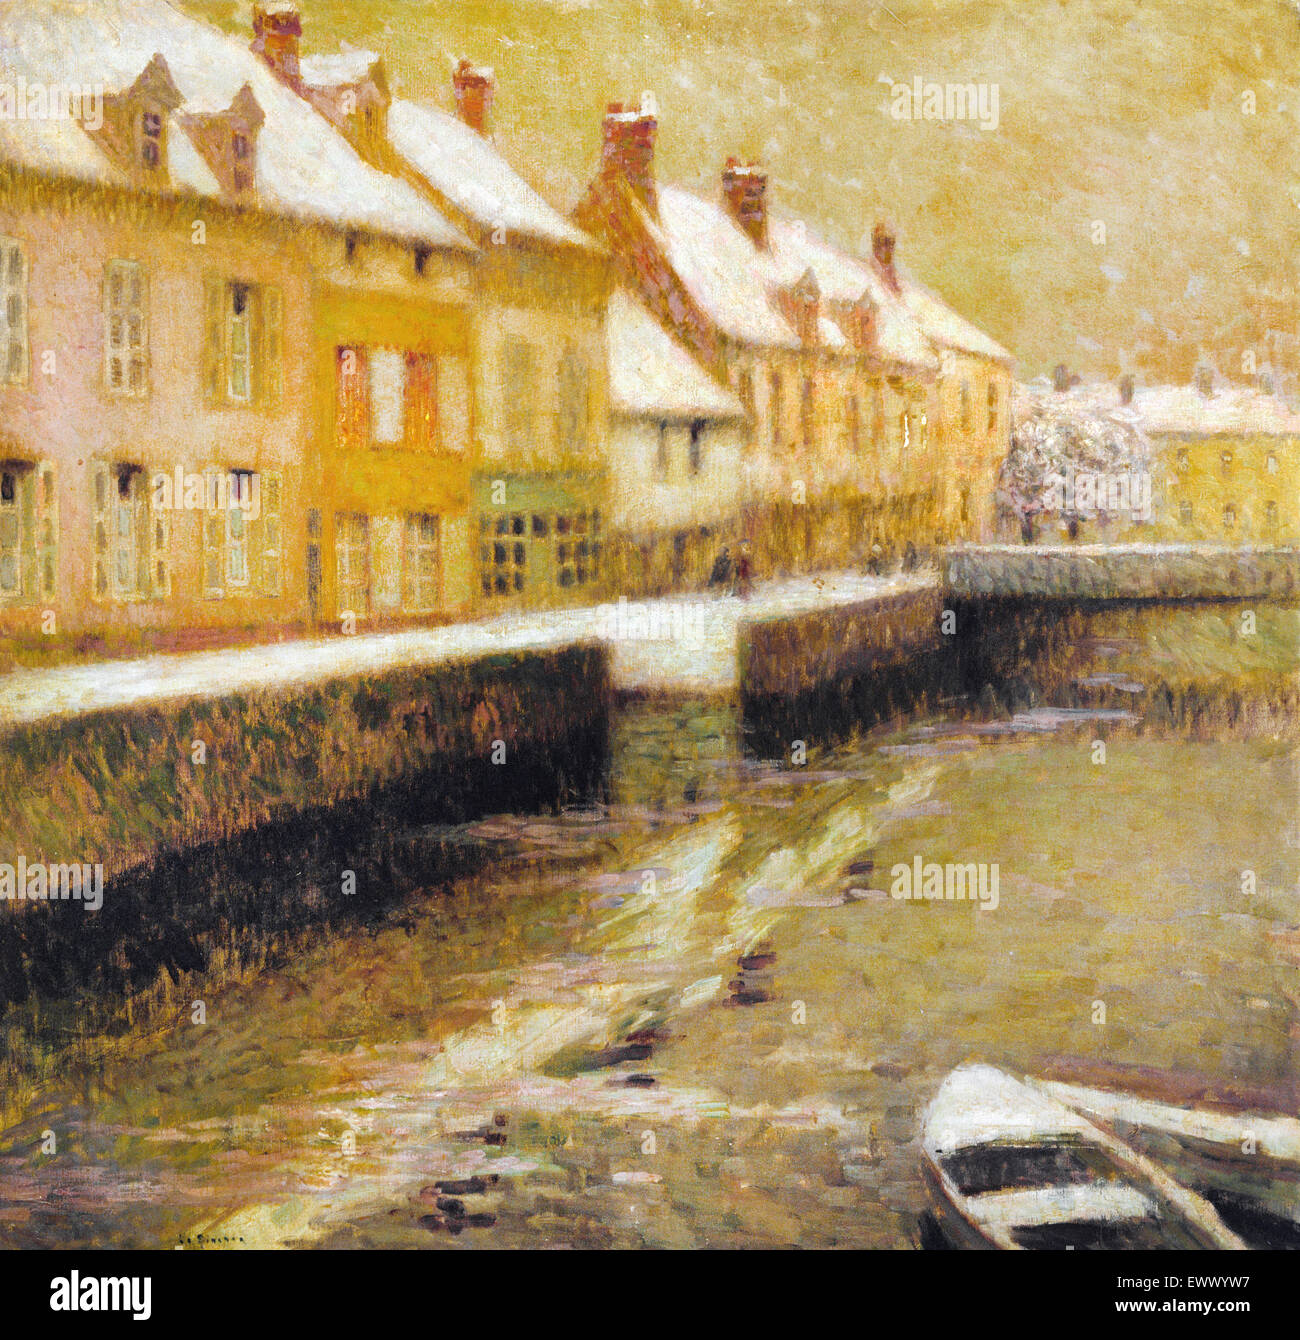 Henri Le Sidaner, Canal in Bruges, Winter 1899 Oil on canvas. Art Gallery of New South Wales, Sydney, Australia. Stock Photo